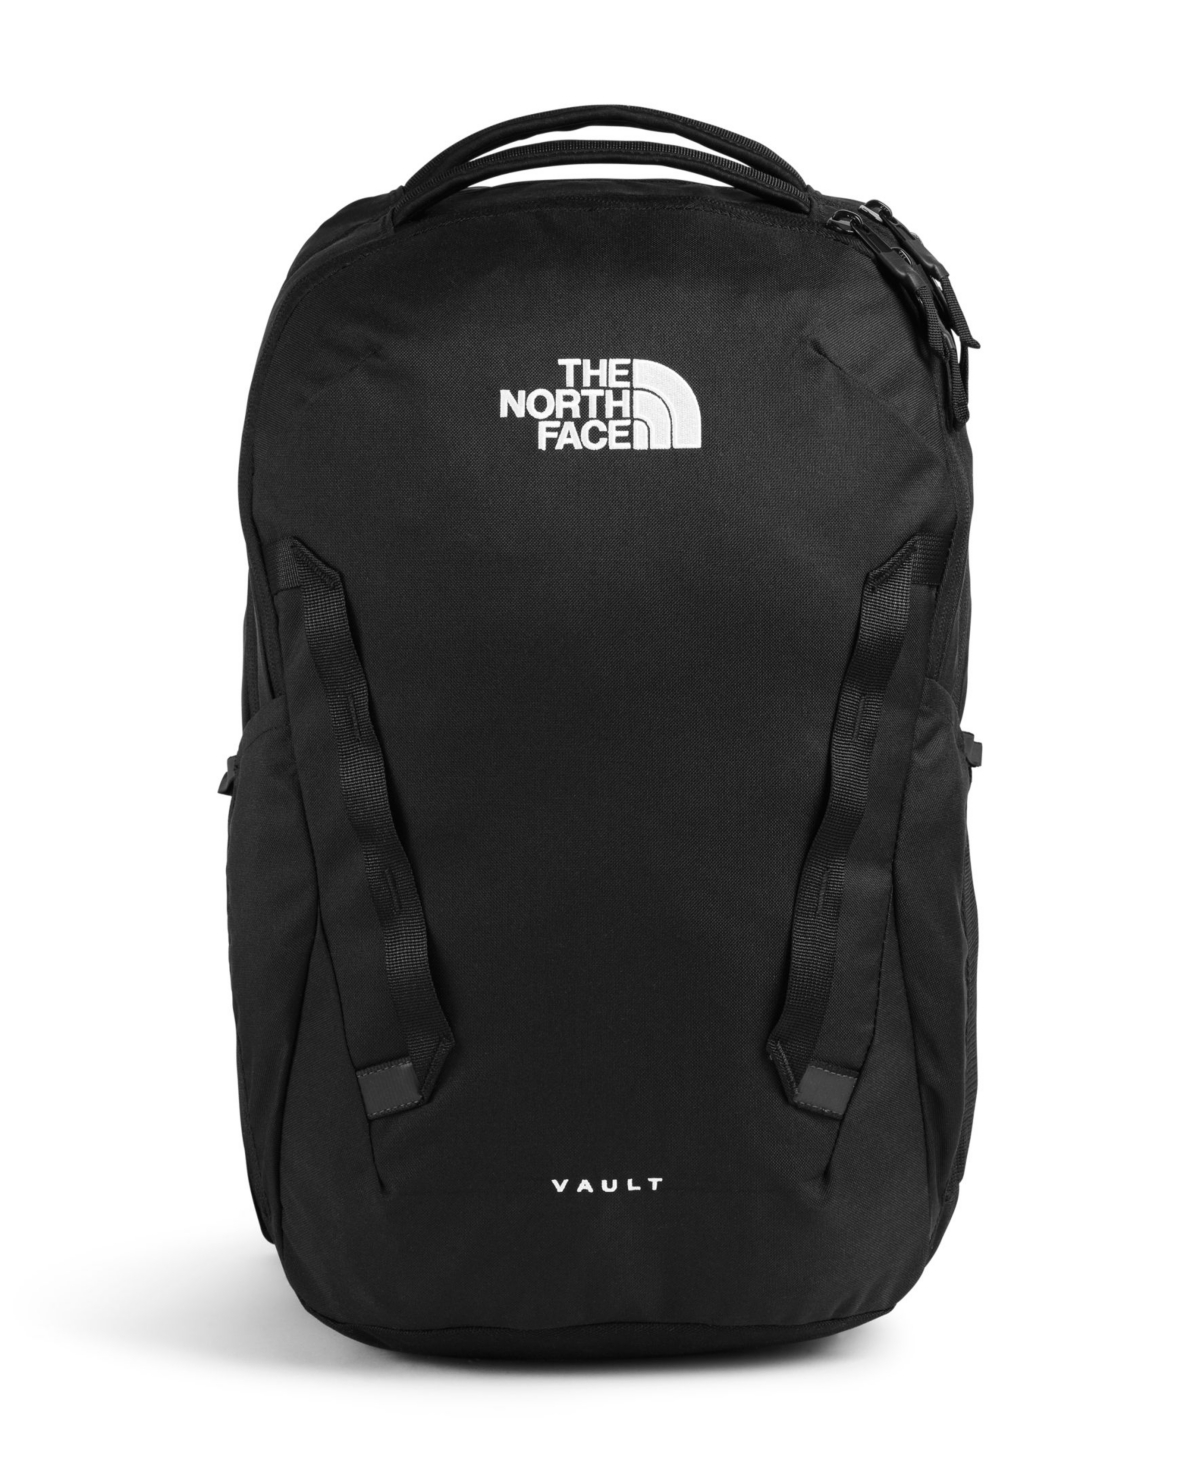 THE NORTH FACE MEN'S VAULT BACKPACK